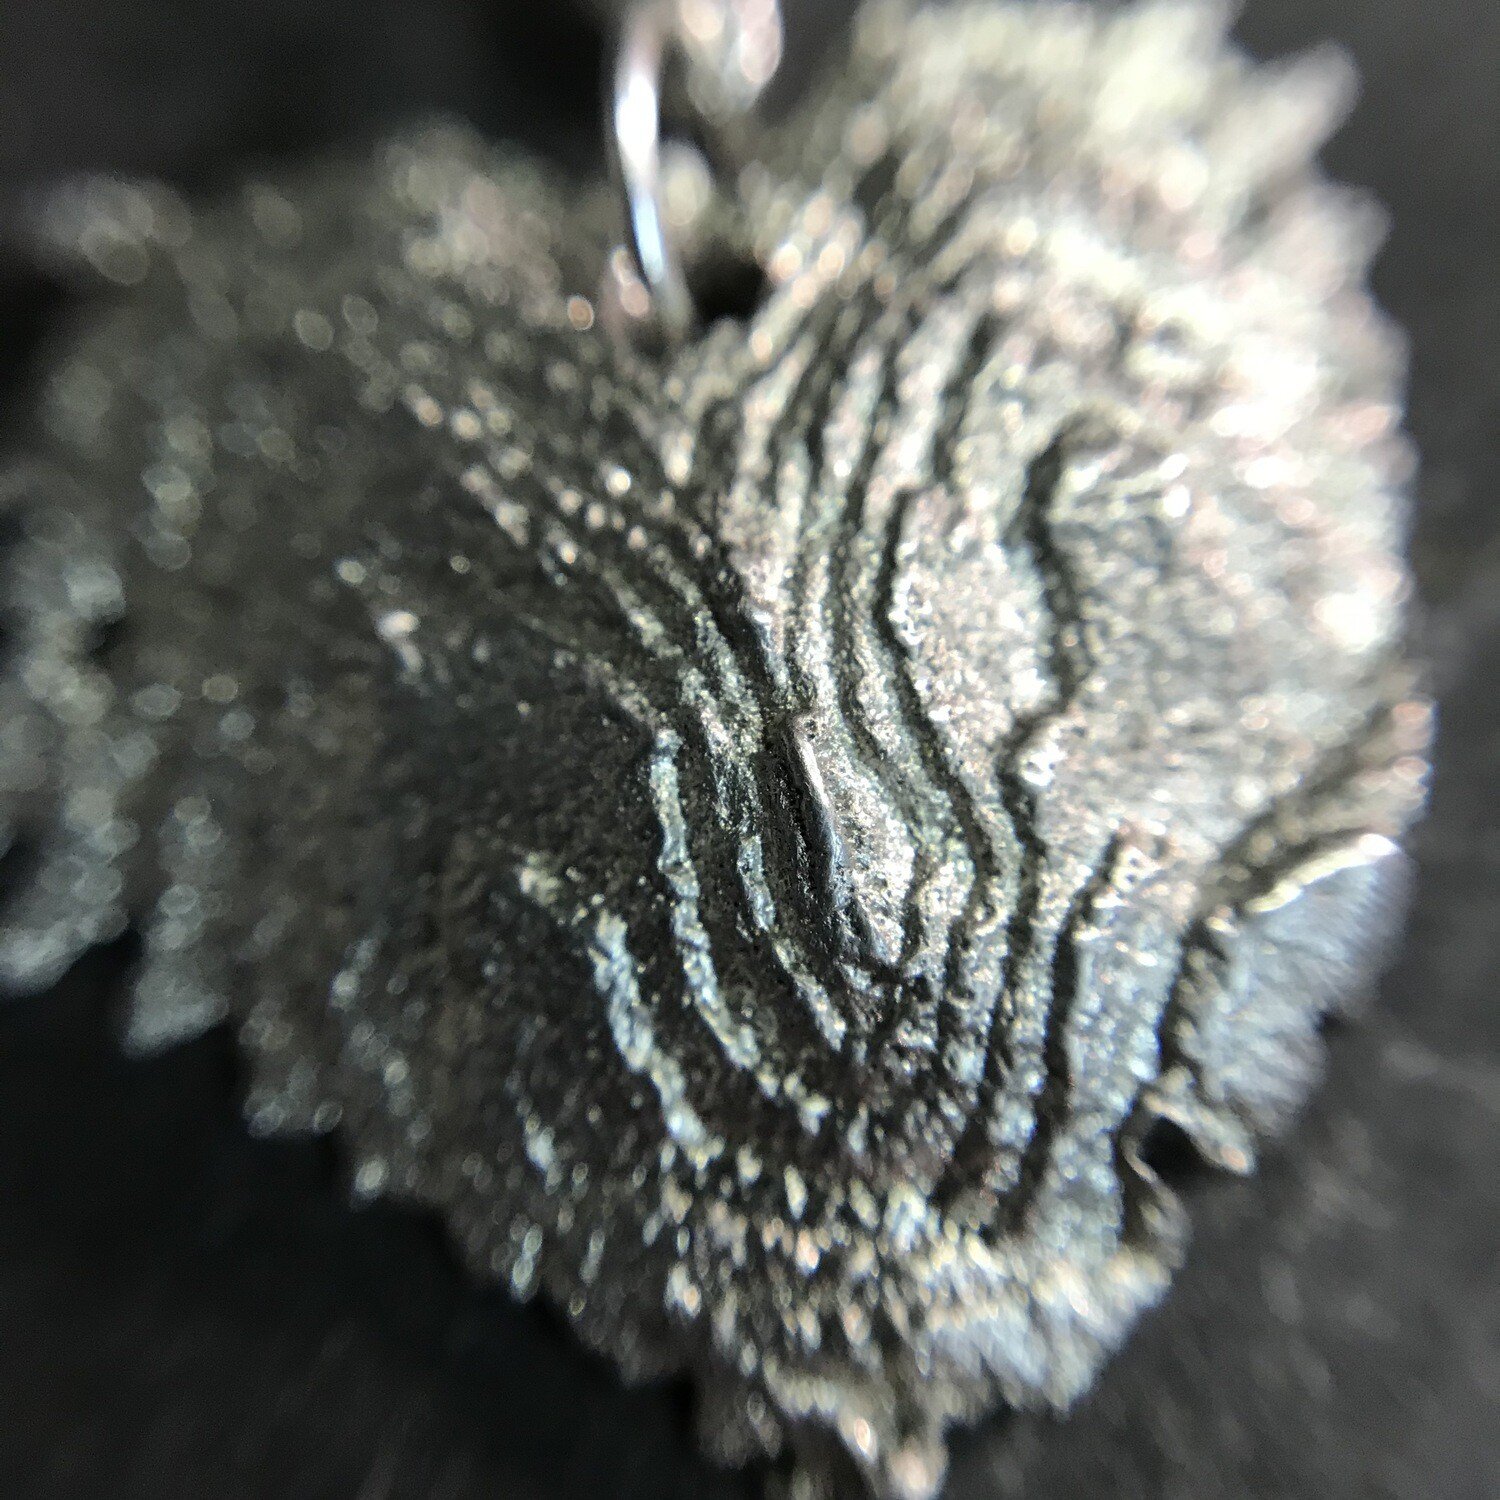 Pewter Casting Workshop - One to One - 1 Day